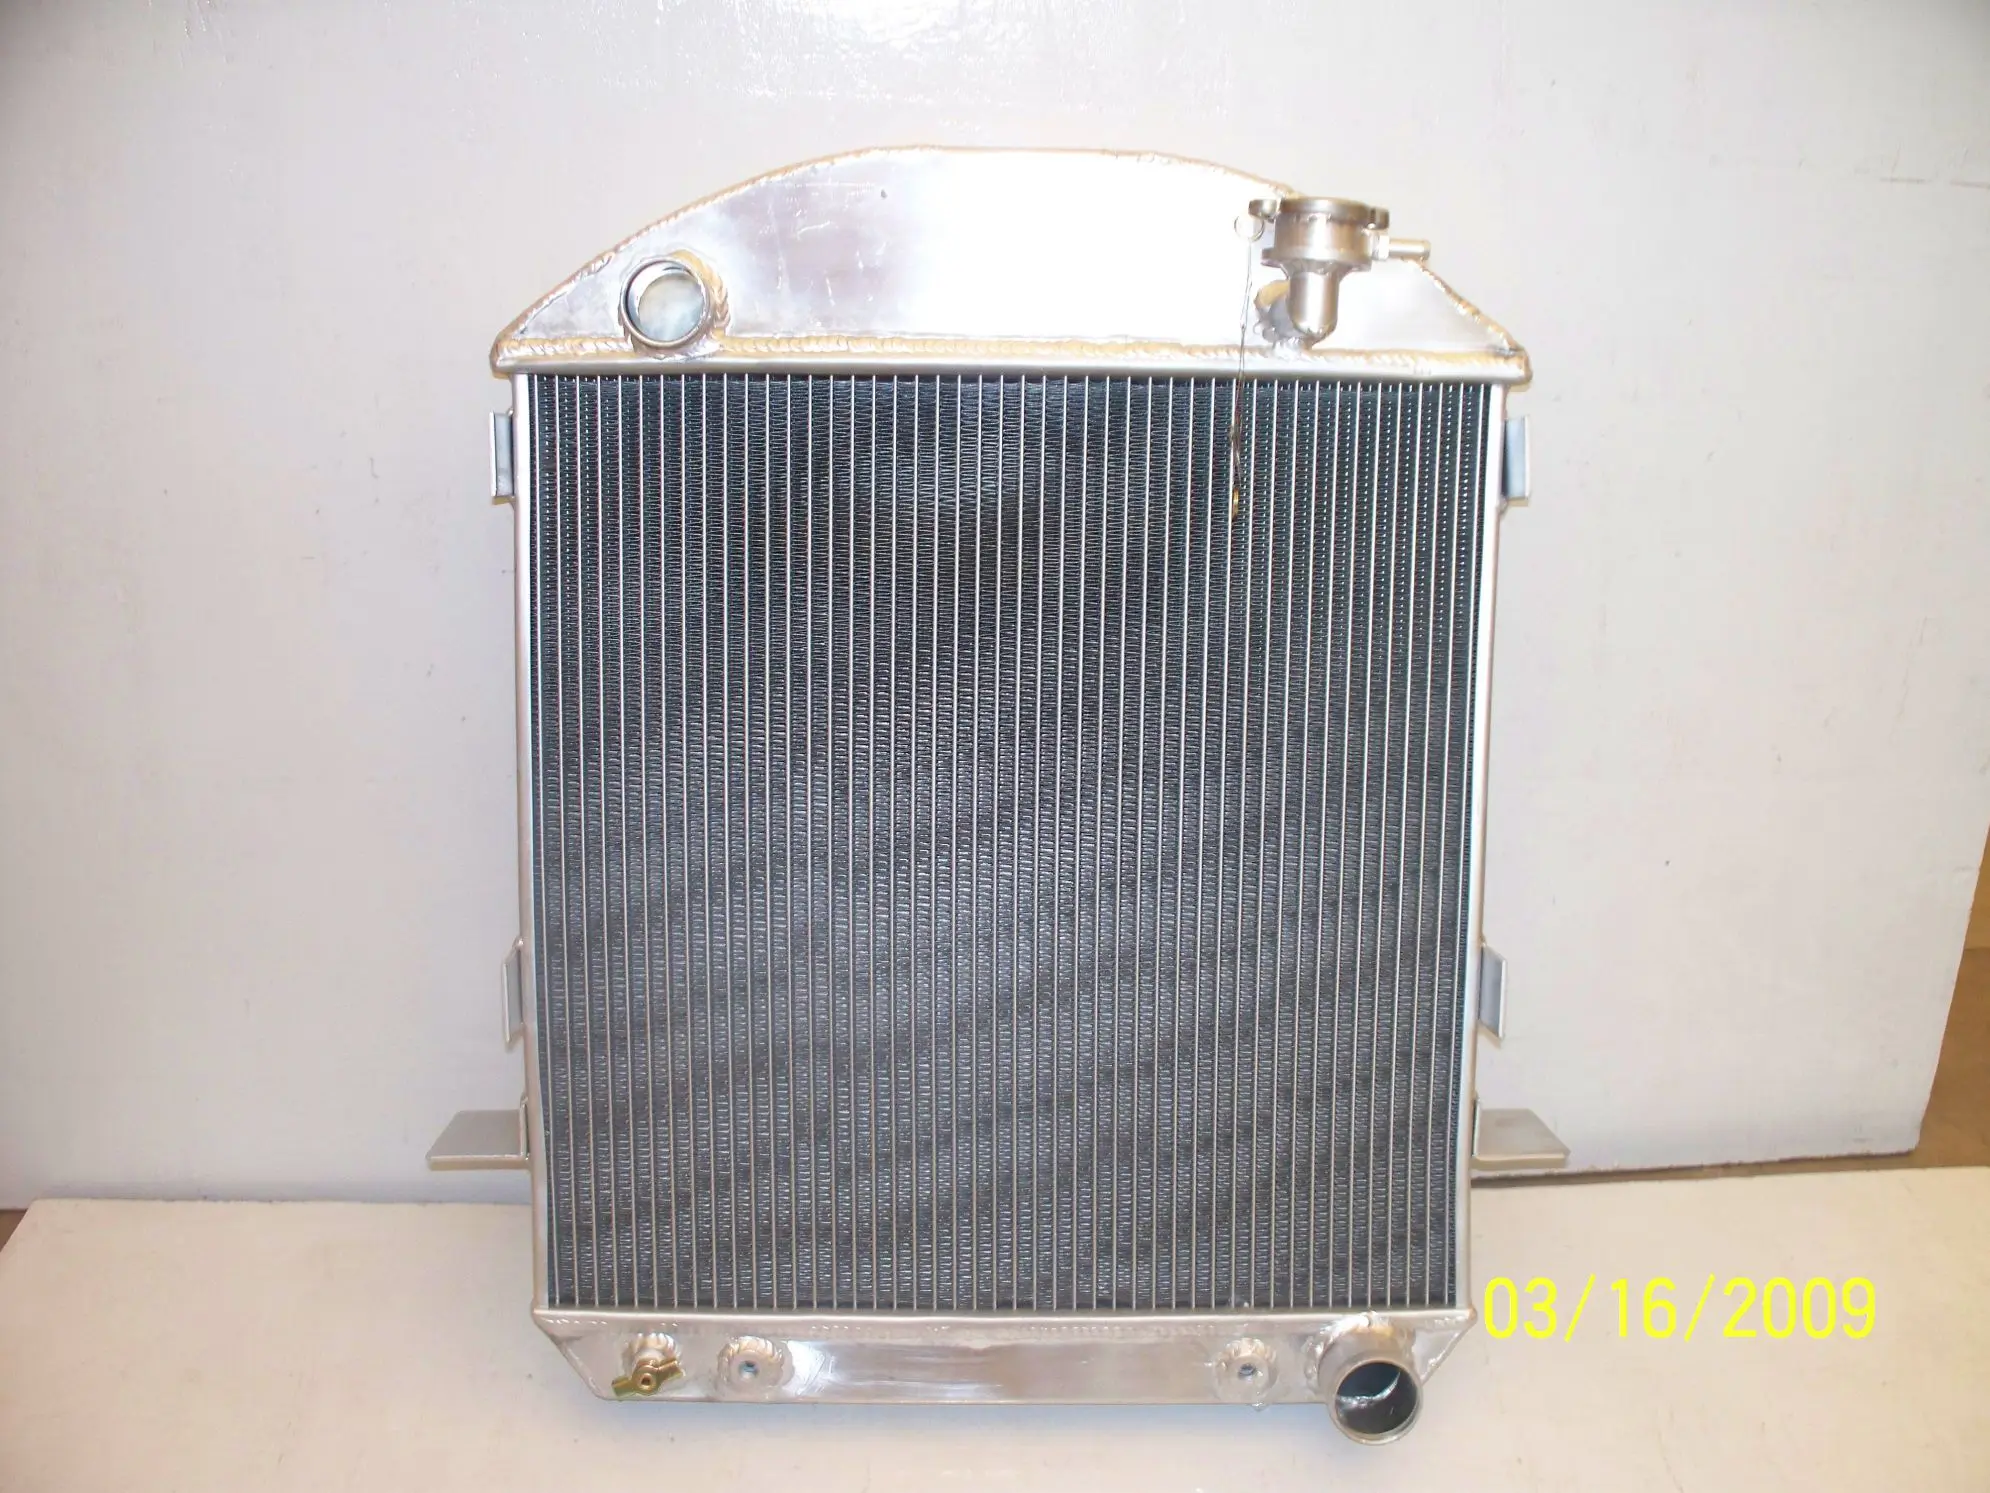 

3 ROW ALUMINUM RADIATOR for 1924 1925 1926 1927 FORD MODEL T BUCKET CHEVY ENGINE AT